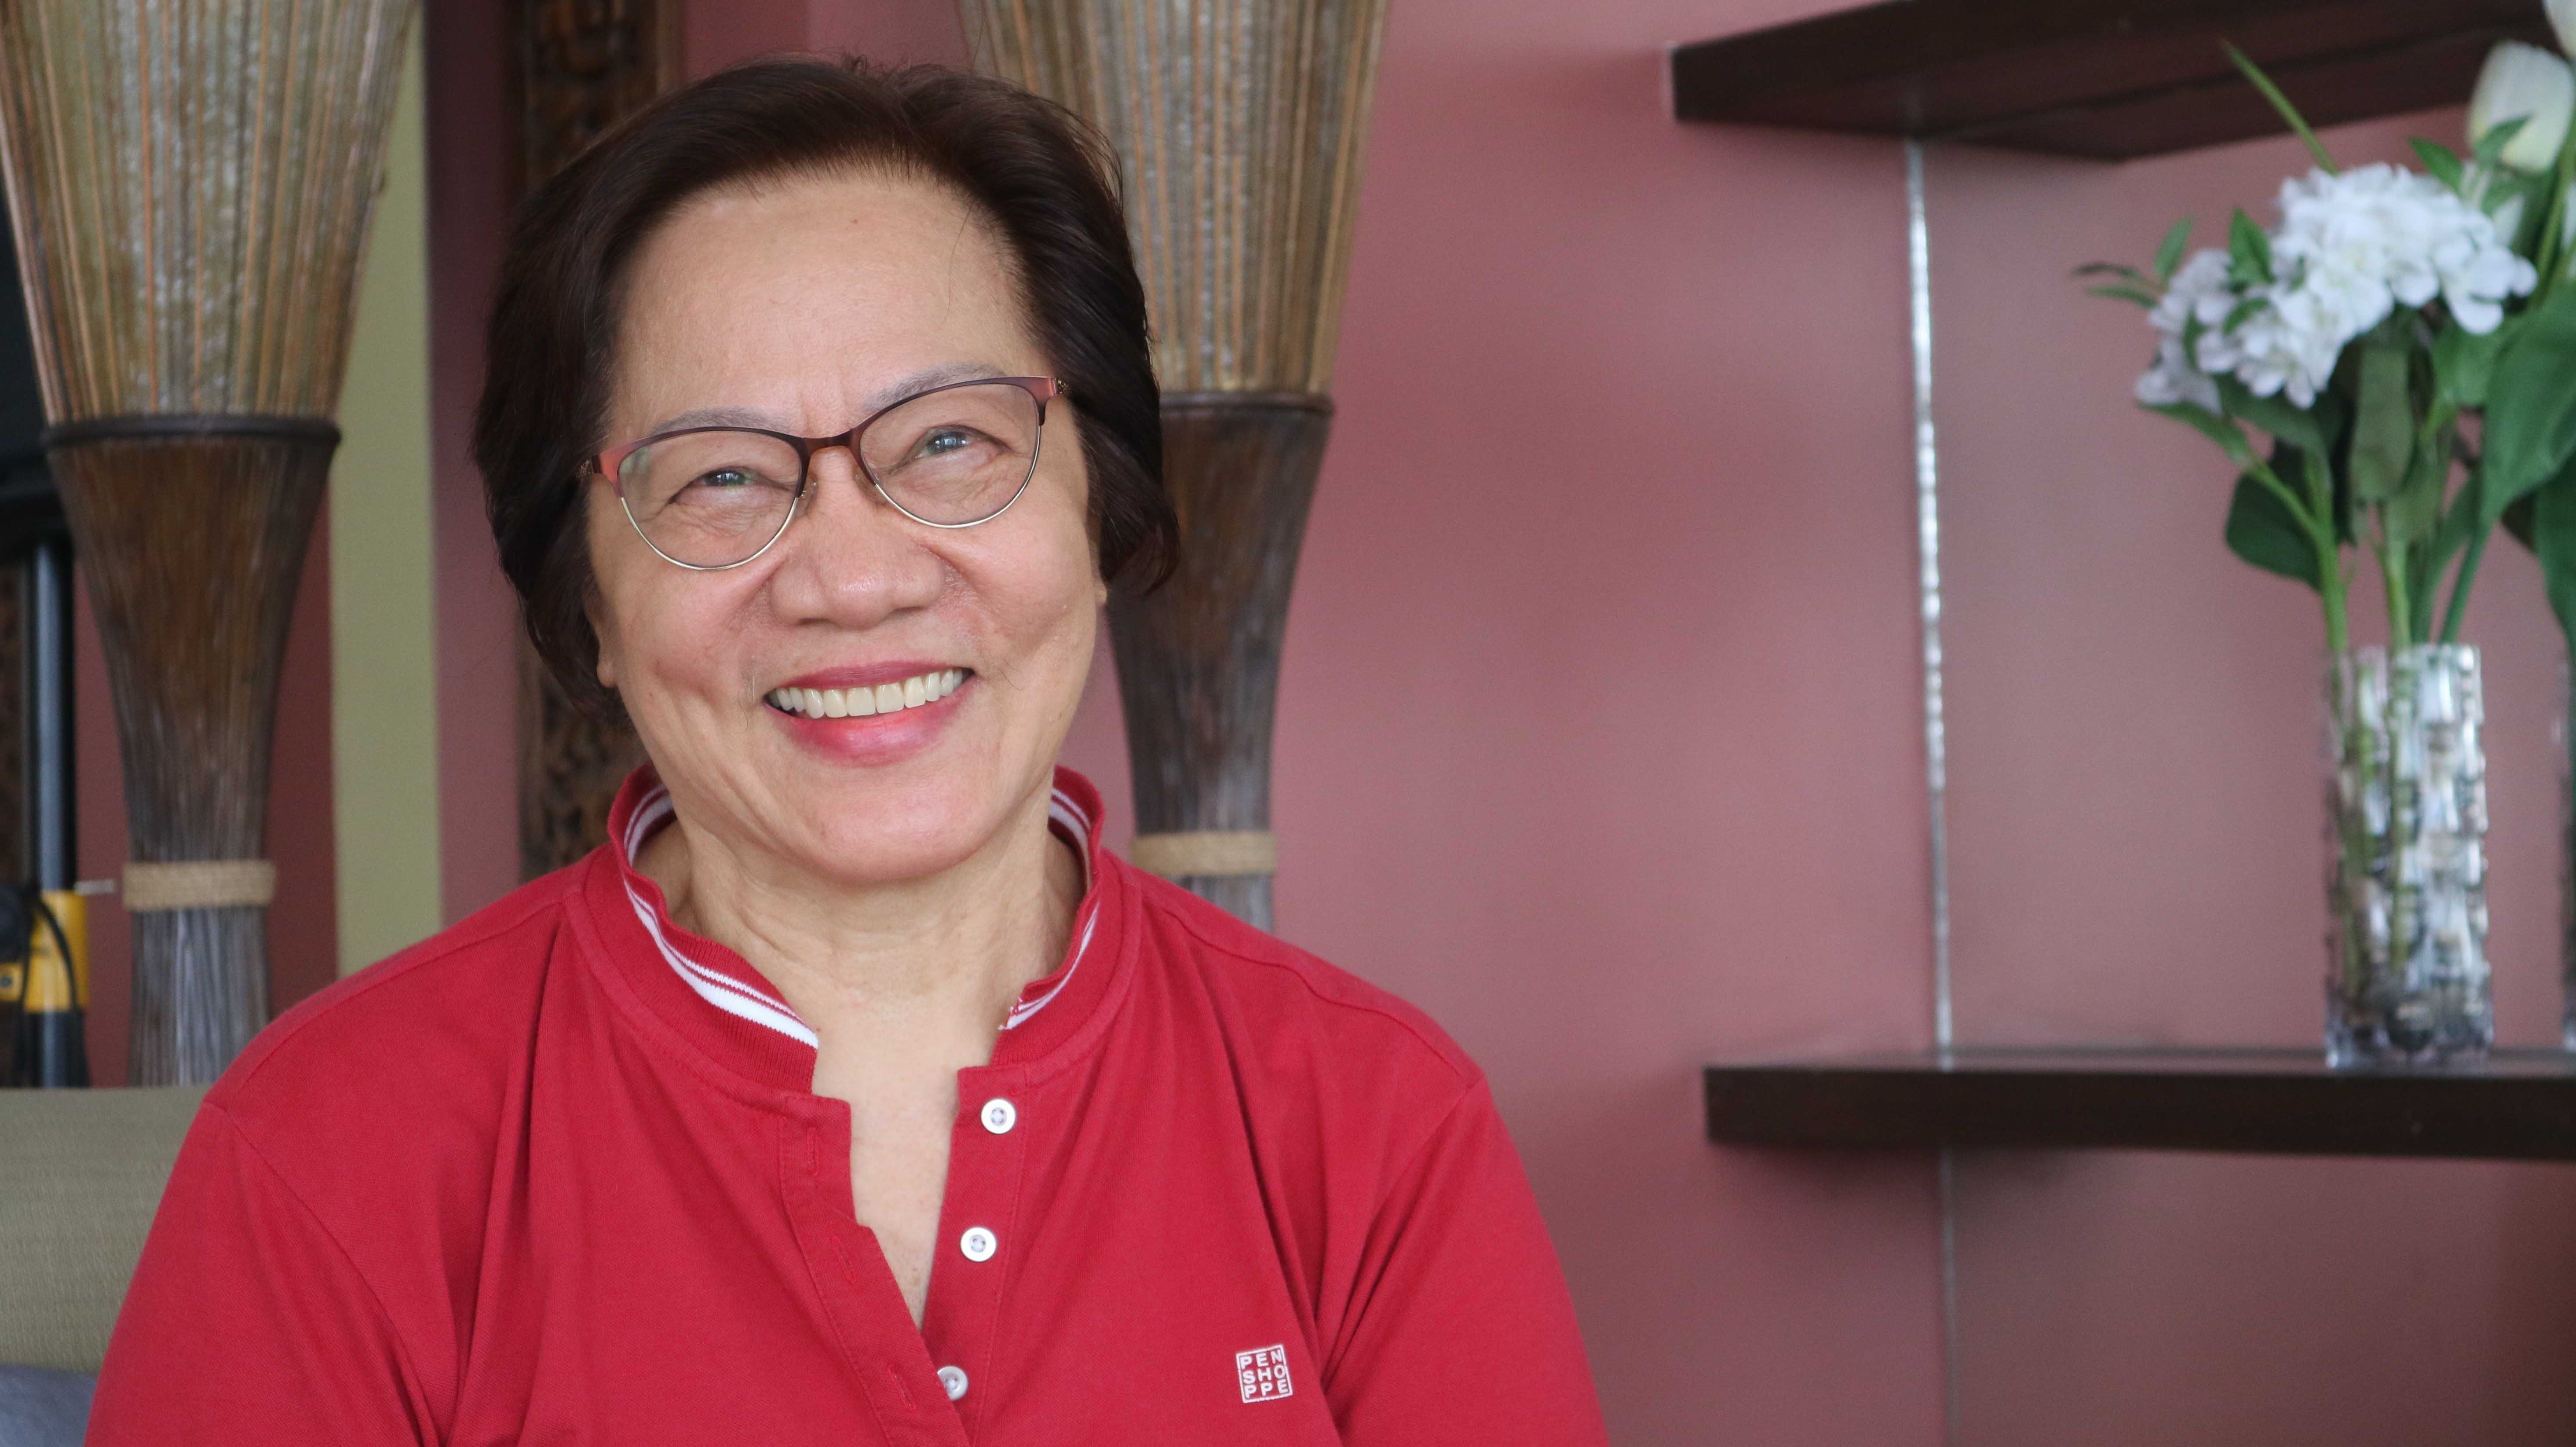 Ms. Ching Andaya has been a resident of Royal Palm Residences since 2009.